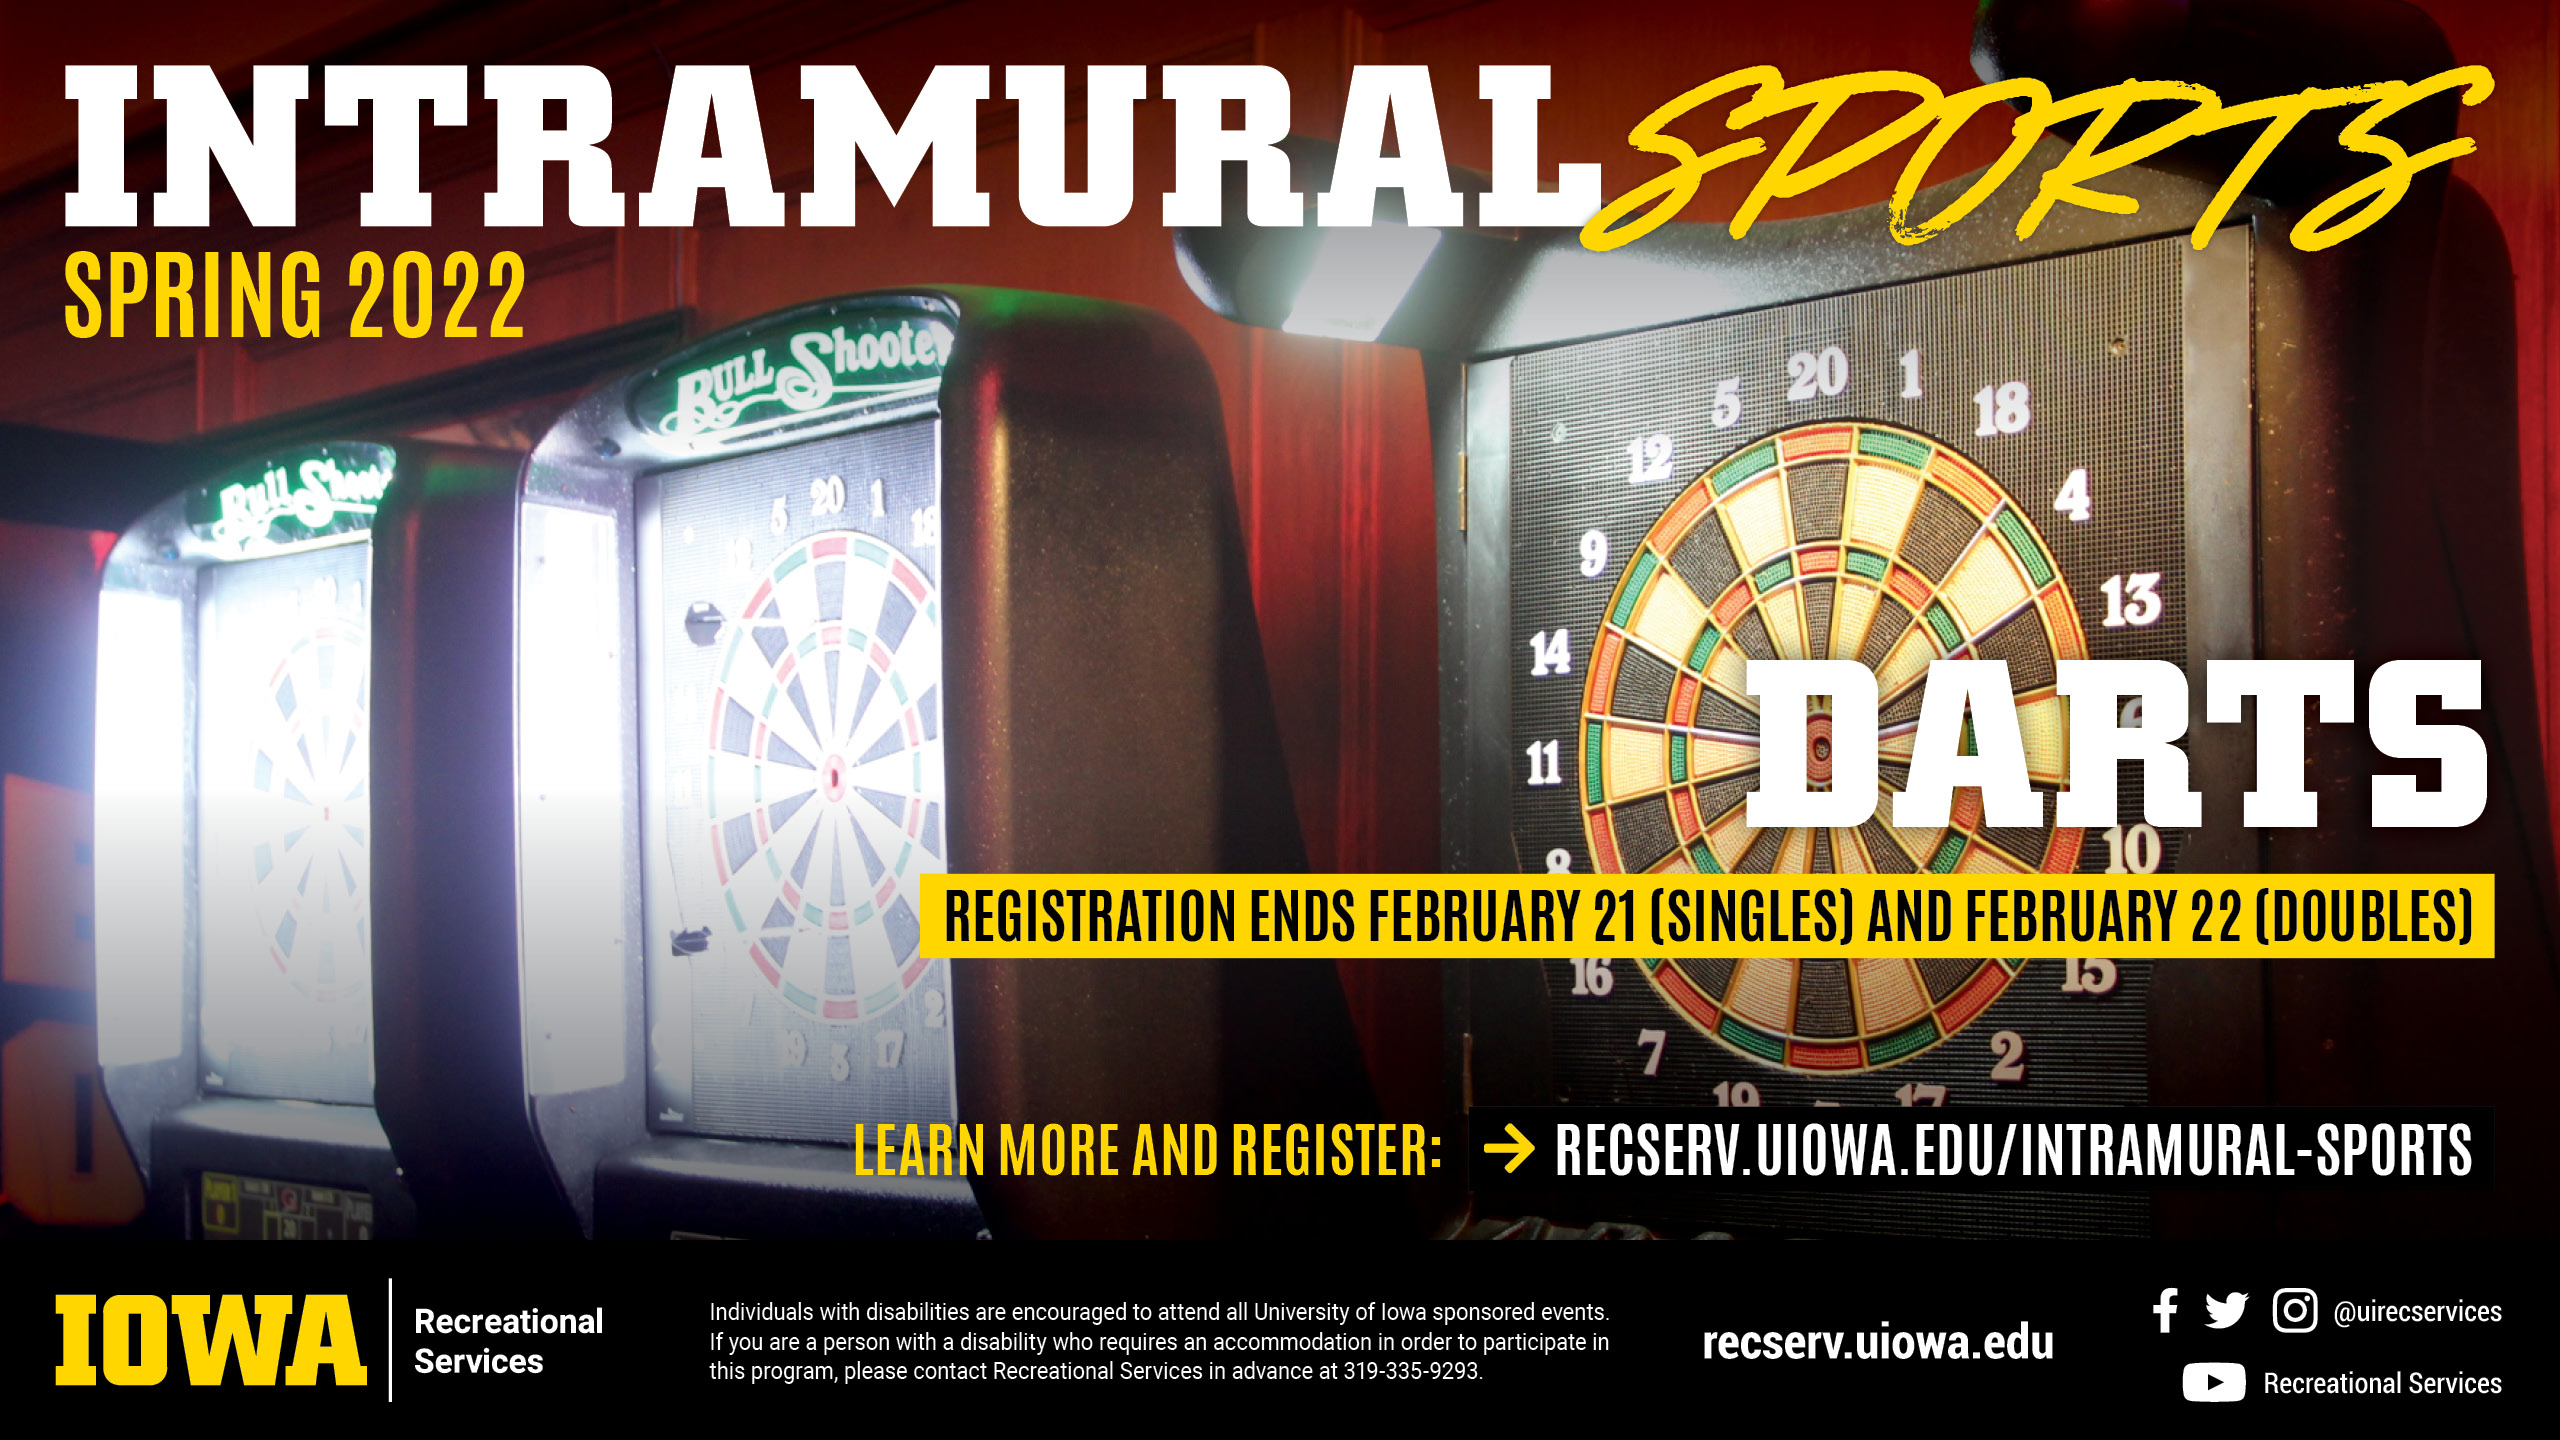 Intramural Sports Spring 2022 Darts Registration ends February 21 (Singles) and February 22 (Doubles) learn more and register at: recserv.uiowa.edu/intramural-sports